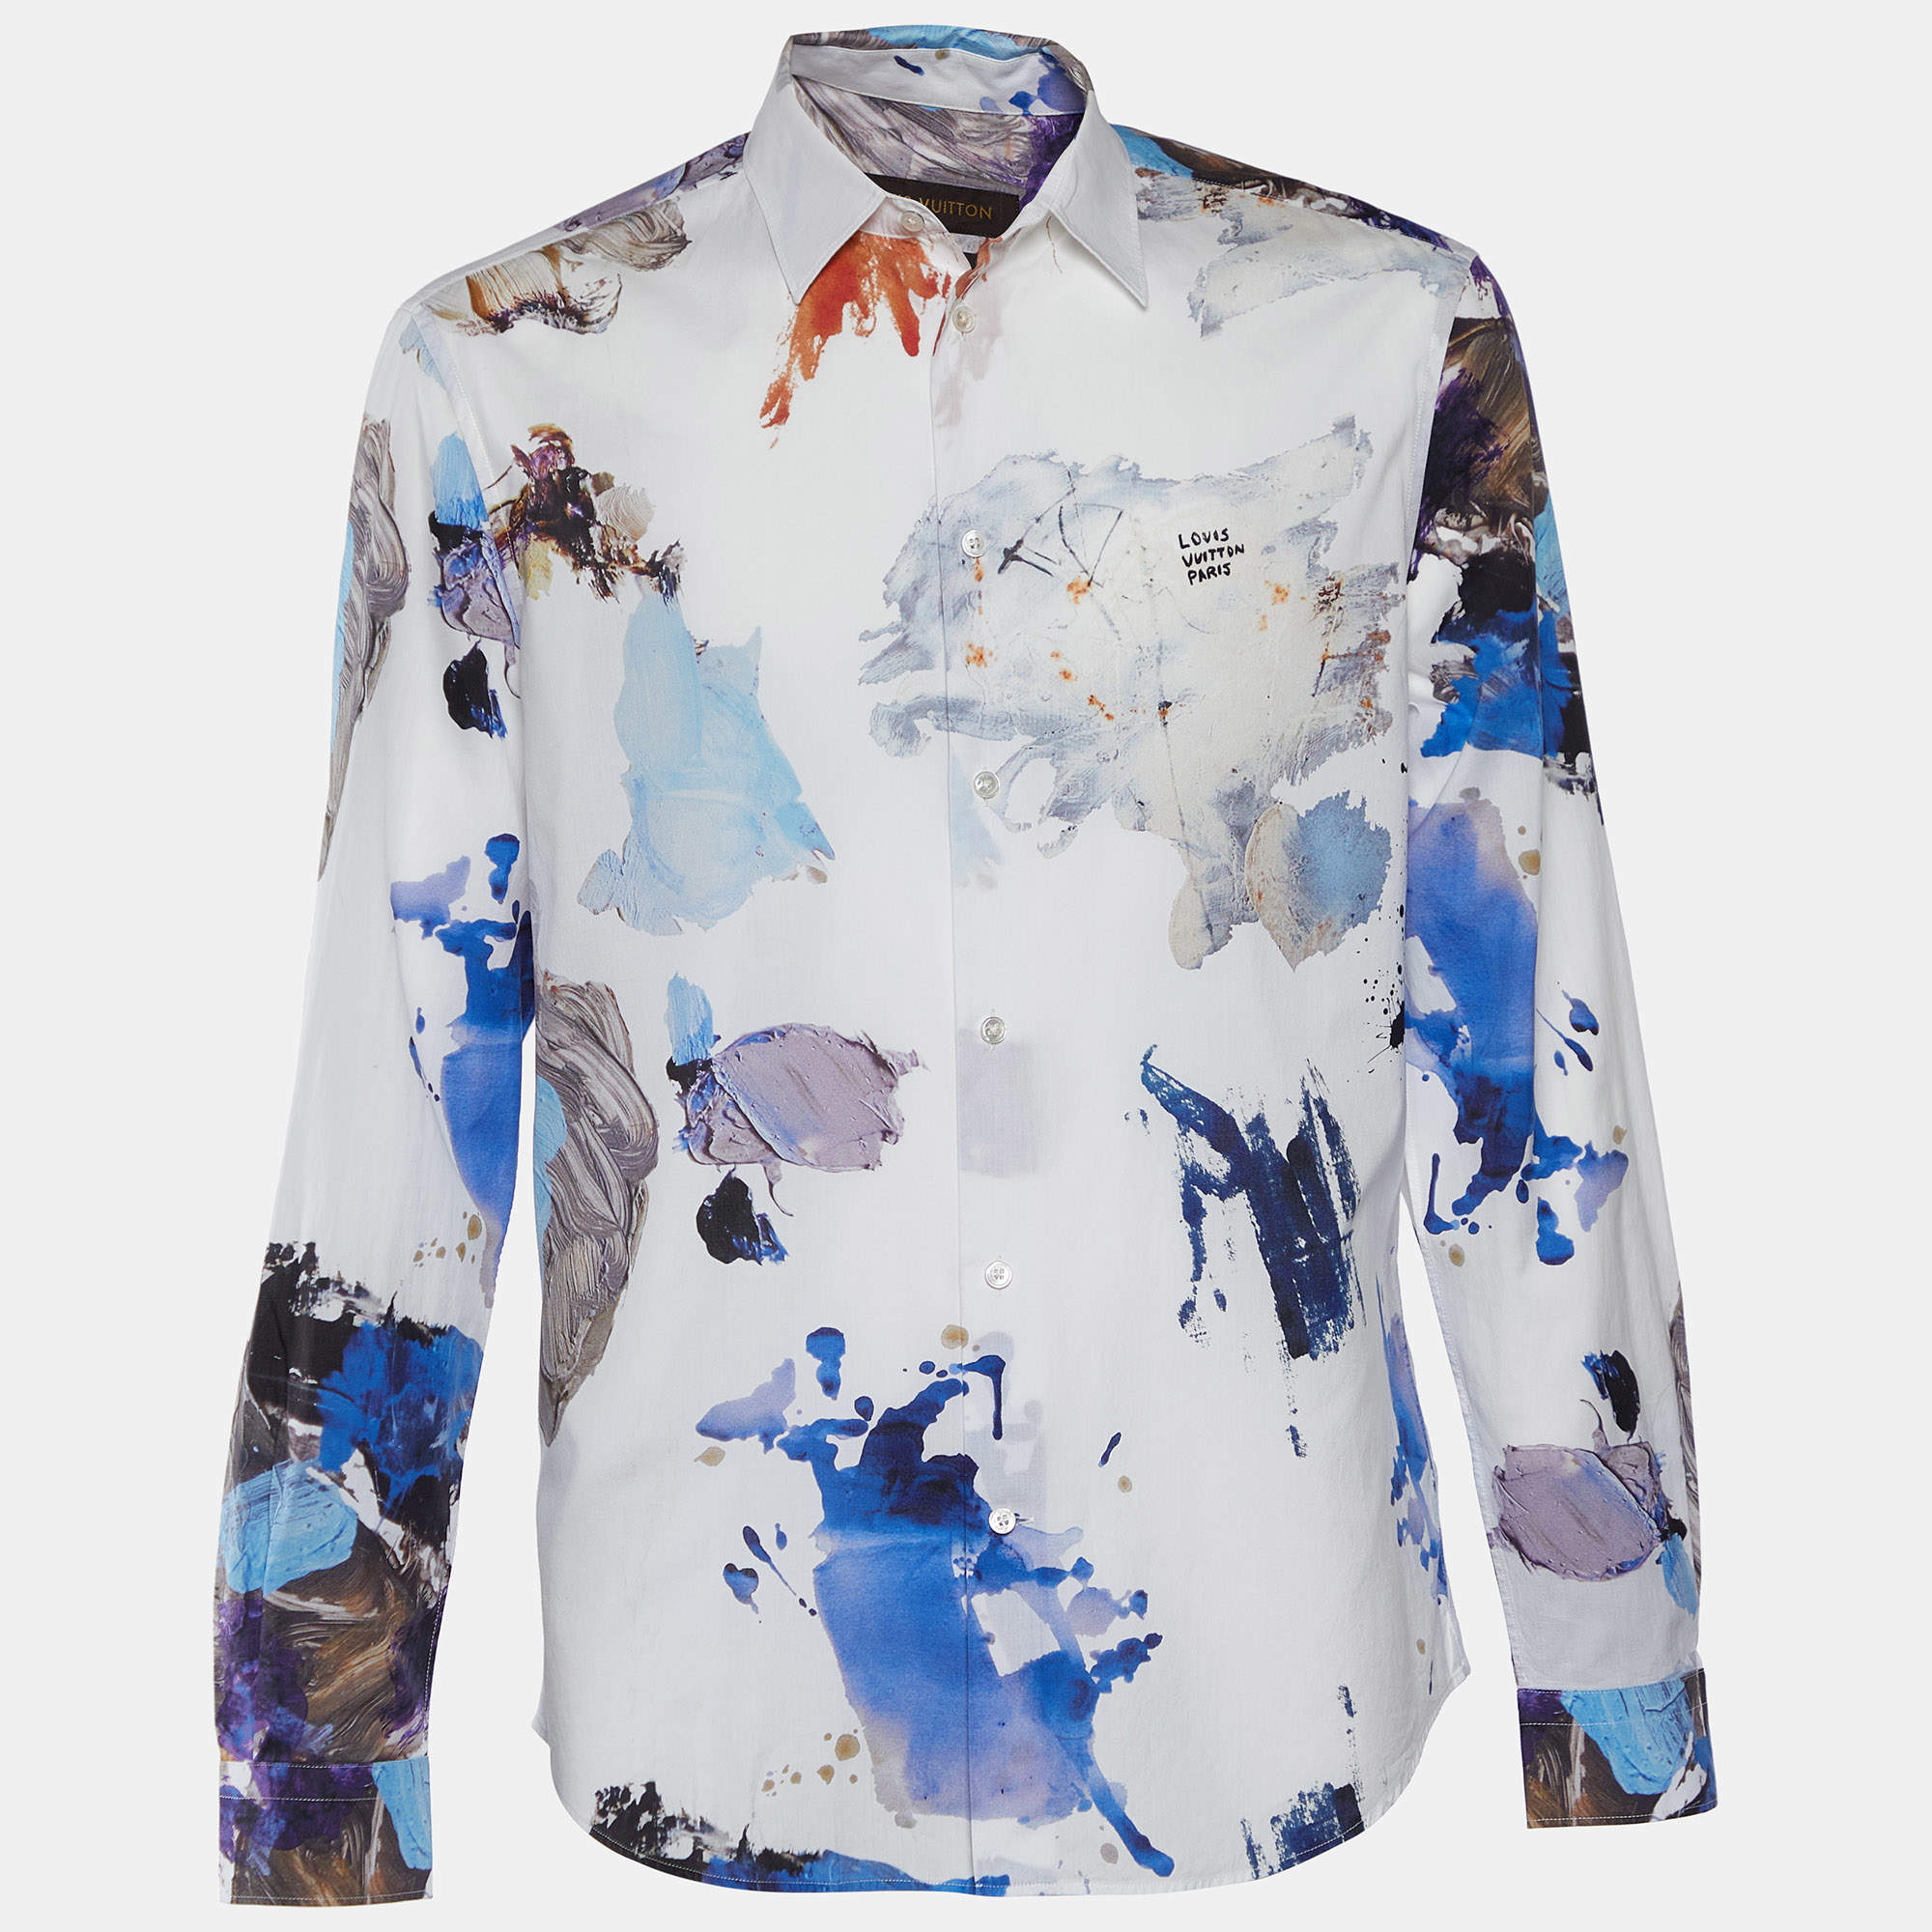 Premium Quality Lv Stuff Pure Cotton Shirt » Buy online from ShopnSafe